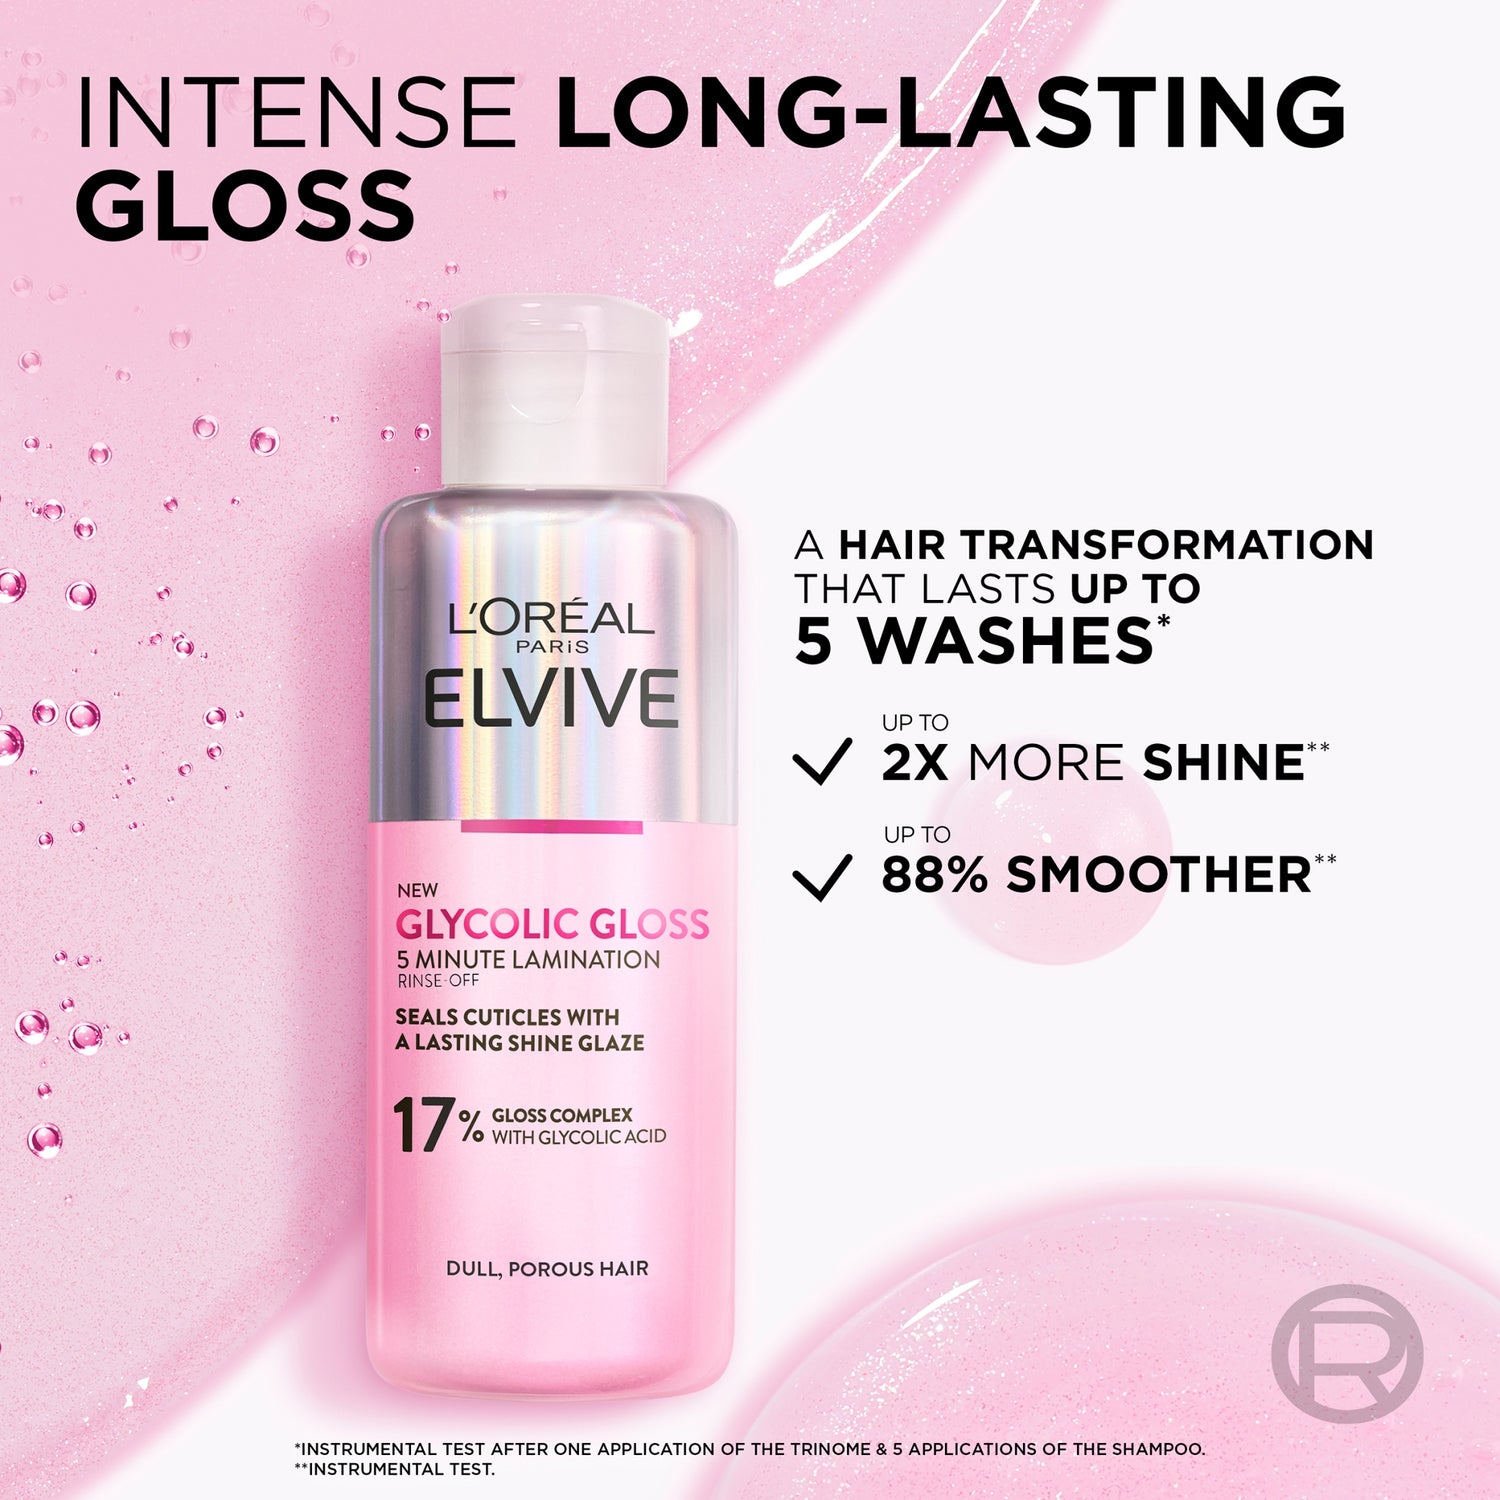 Loreal Elvive Glycolic Gloss Rinse Off Treatment 200ML